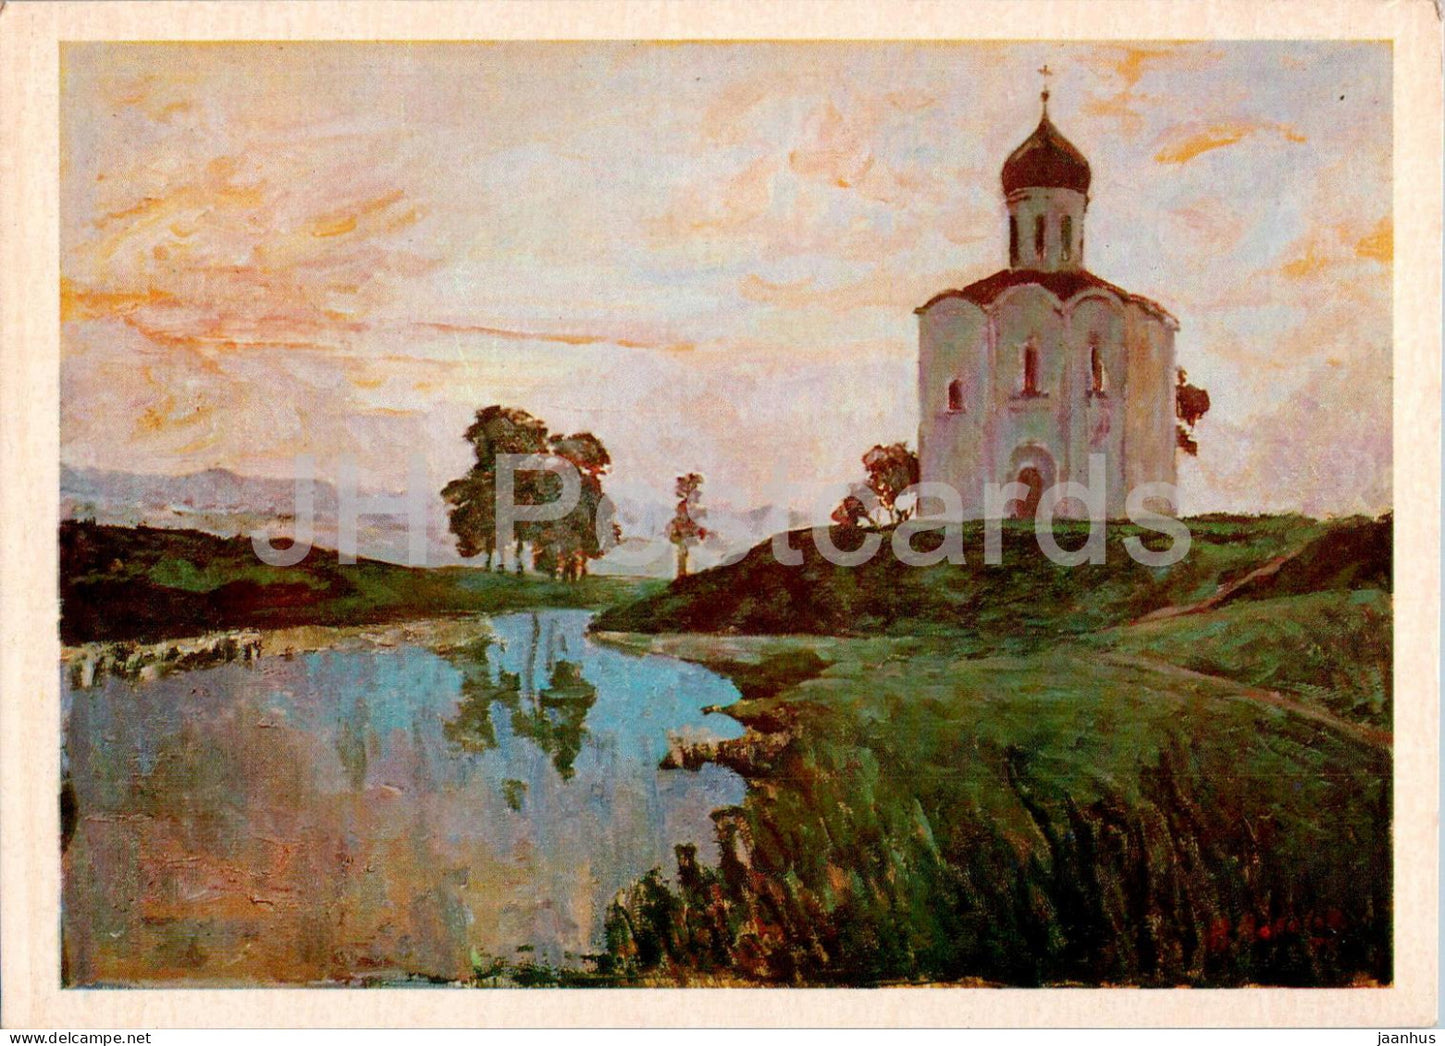 painting by N. Malakhov - Church of the Intercession on the Nerl river - 1 - Russian art - Russia USSR - 1980 - unused - JH Postcards